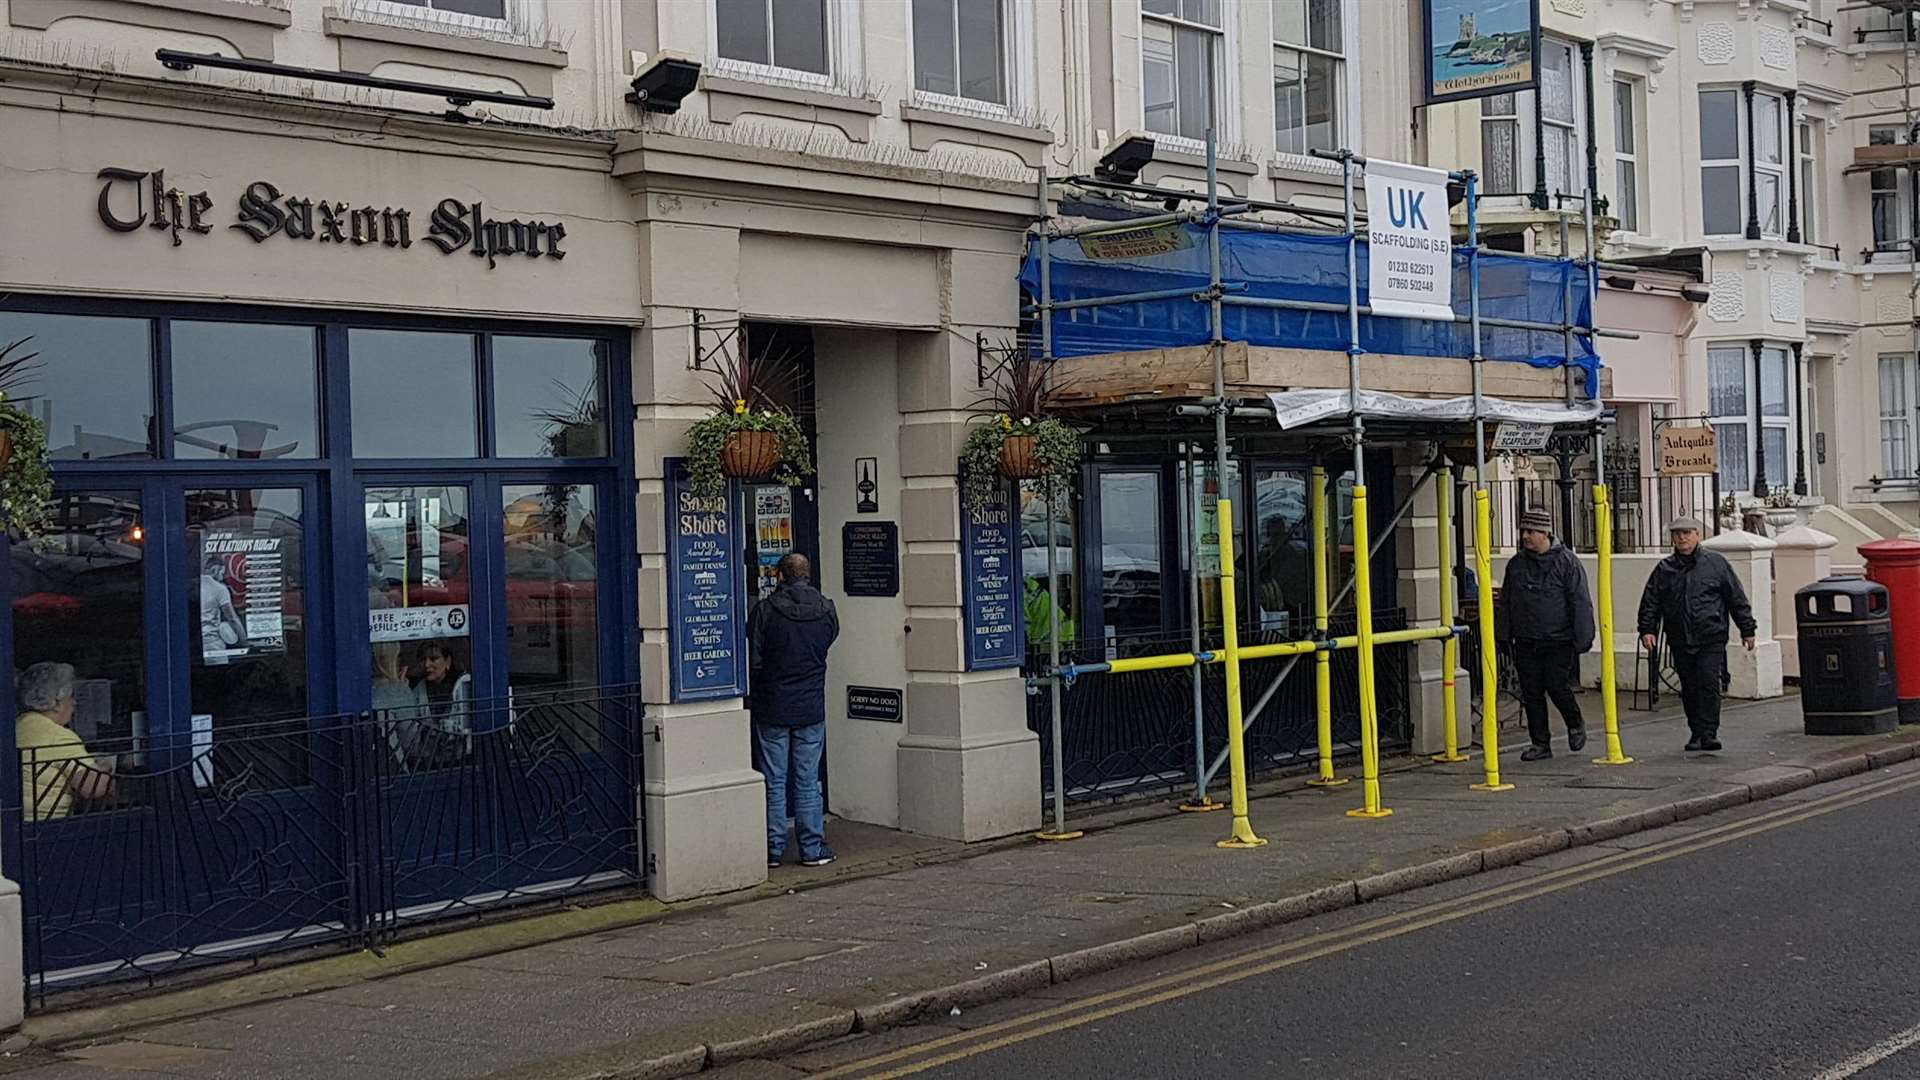 The Saxon Shore pub is still open today following the incident.